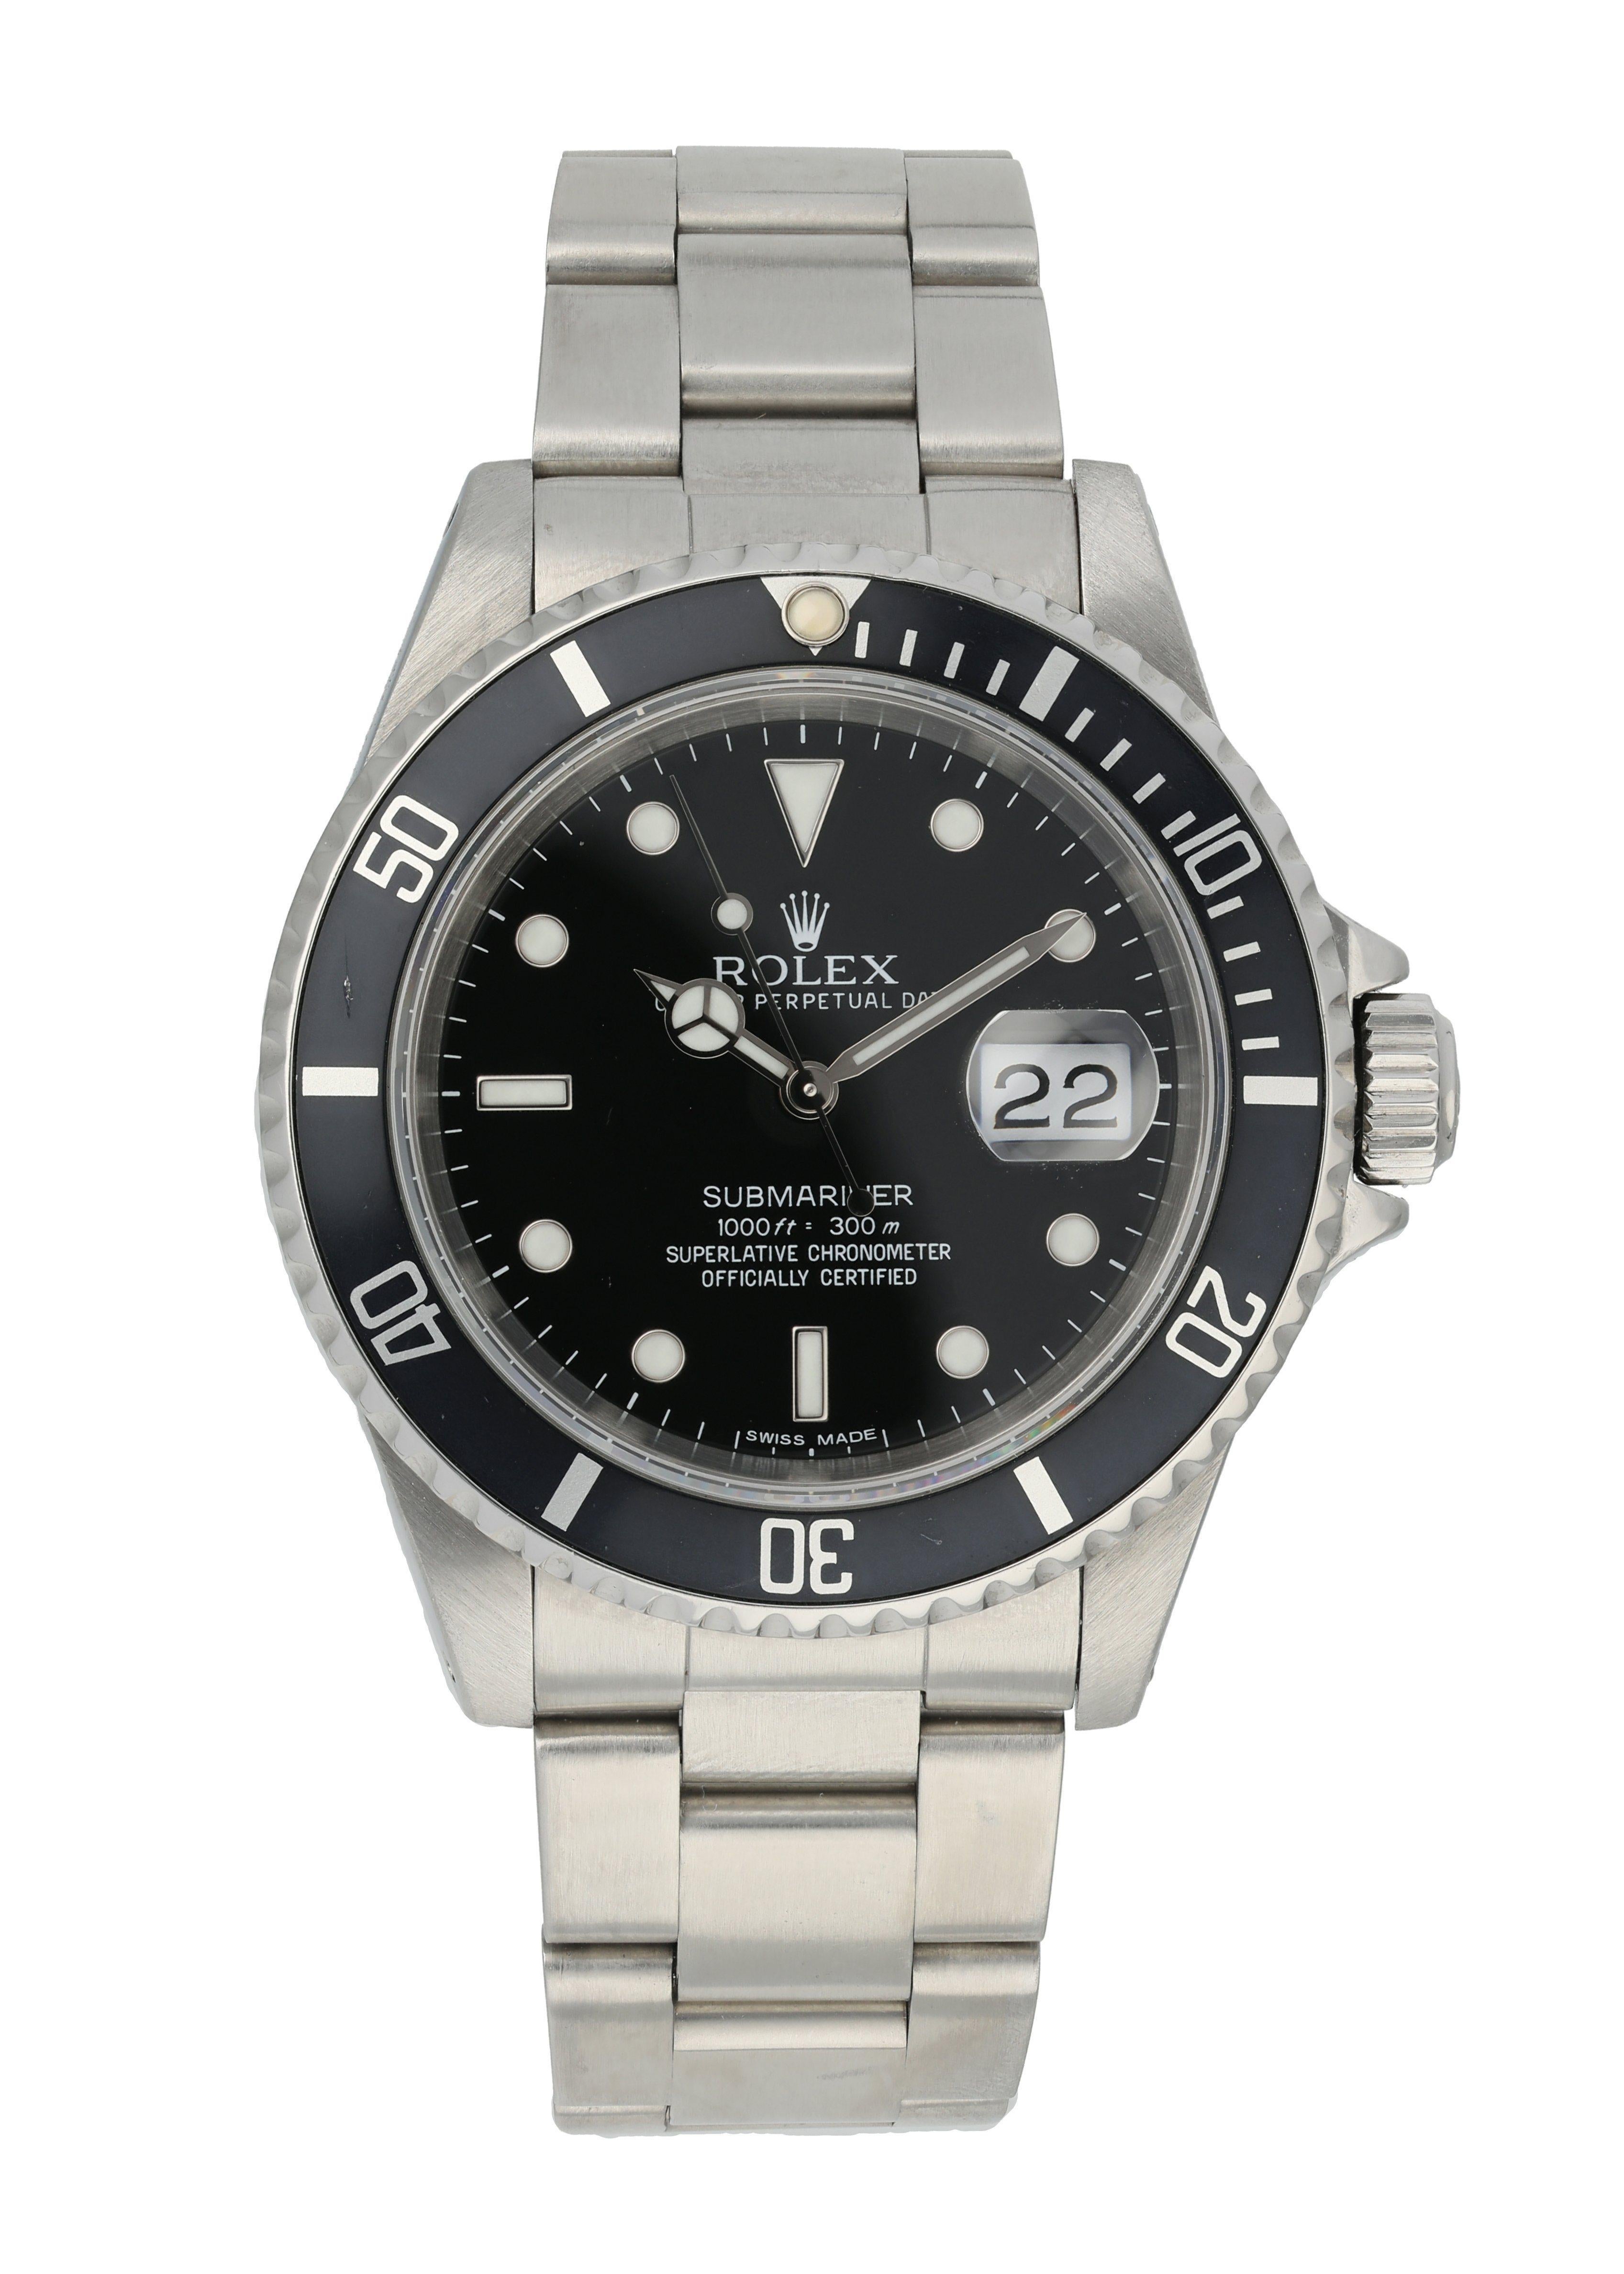 Rolex Submariner 16610 Men's Watch. 
42mm Stainless Steel case. 
Stainless Steel Unidirectional bezel. 
Black dial with Luminous Steel hands and luminous dot hour markers. 
Minute markers on the outer dial. 
Date display at the 3 o'clock position.